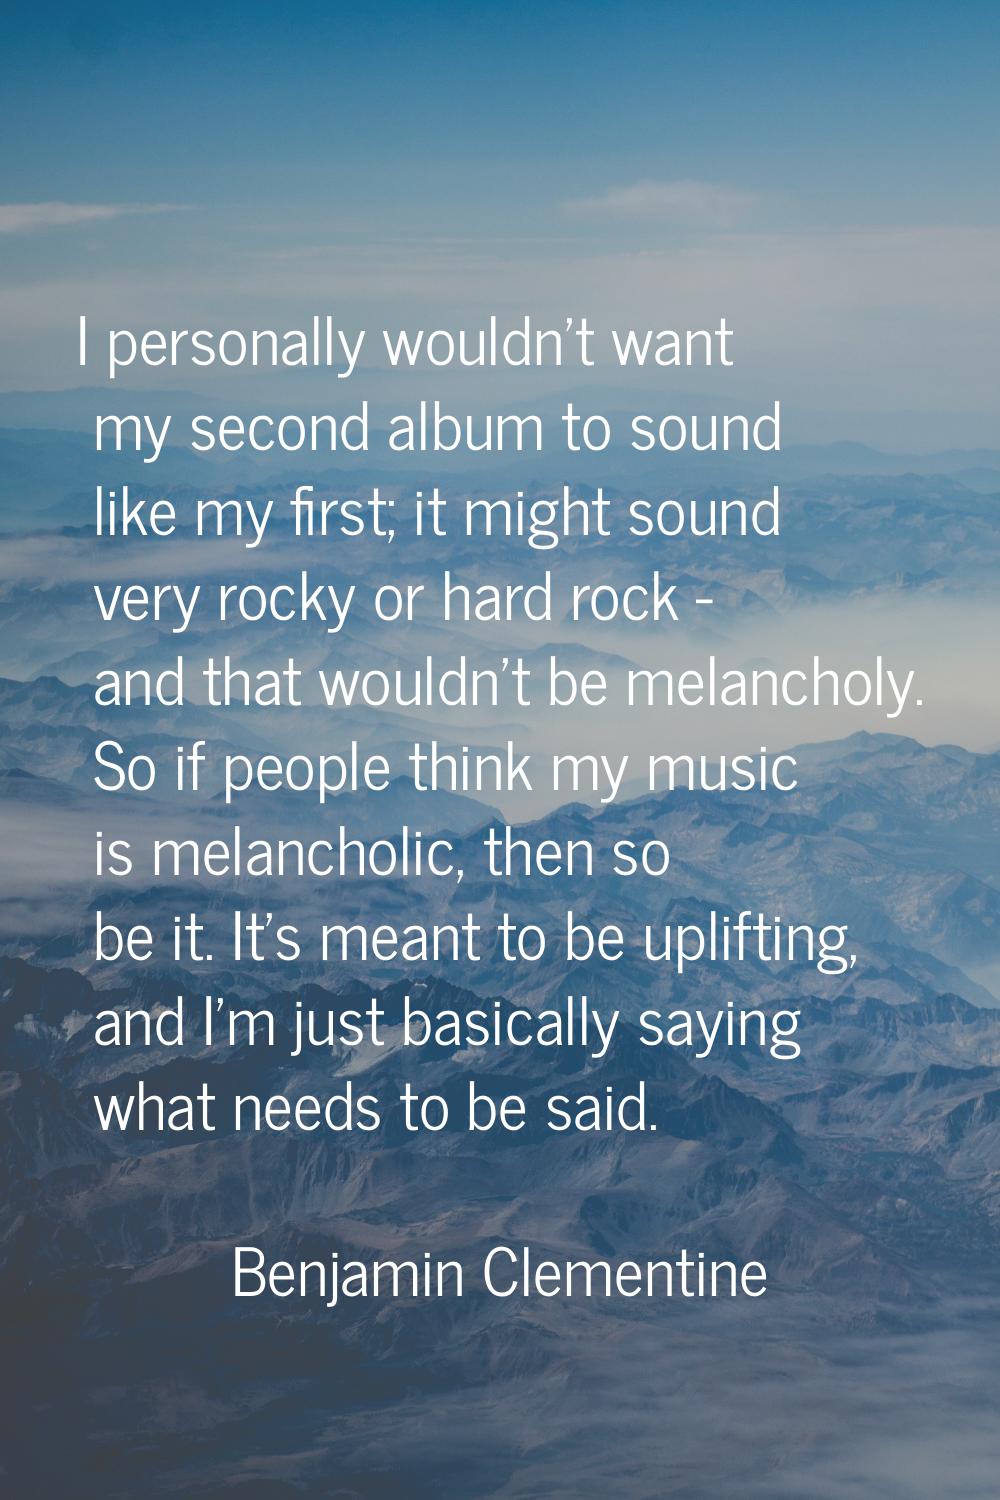 I personally wouldn't want my second album to sound like my first; it might sound very rocky or har